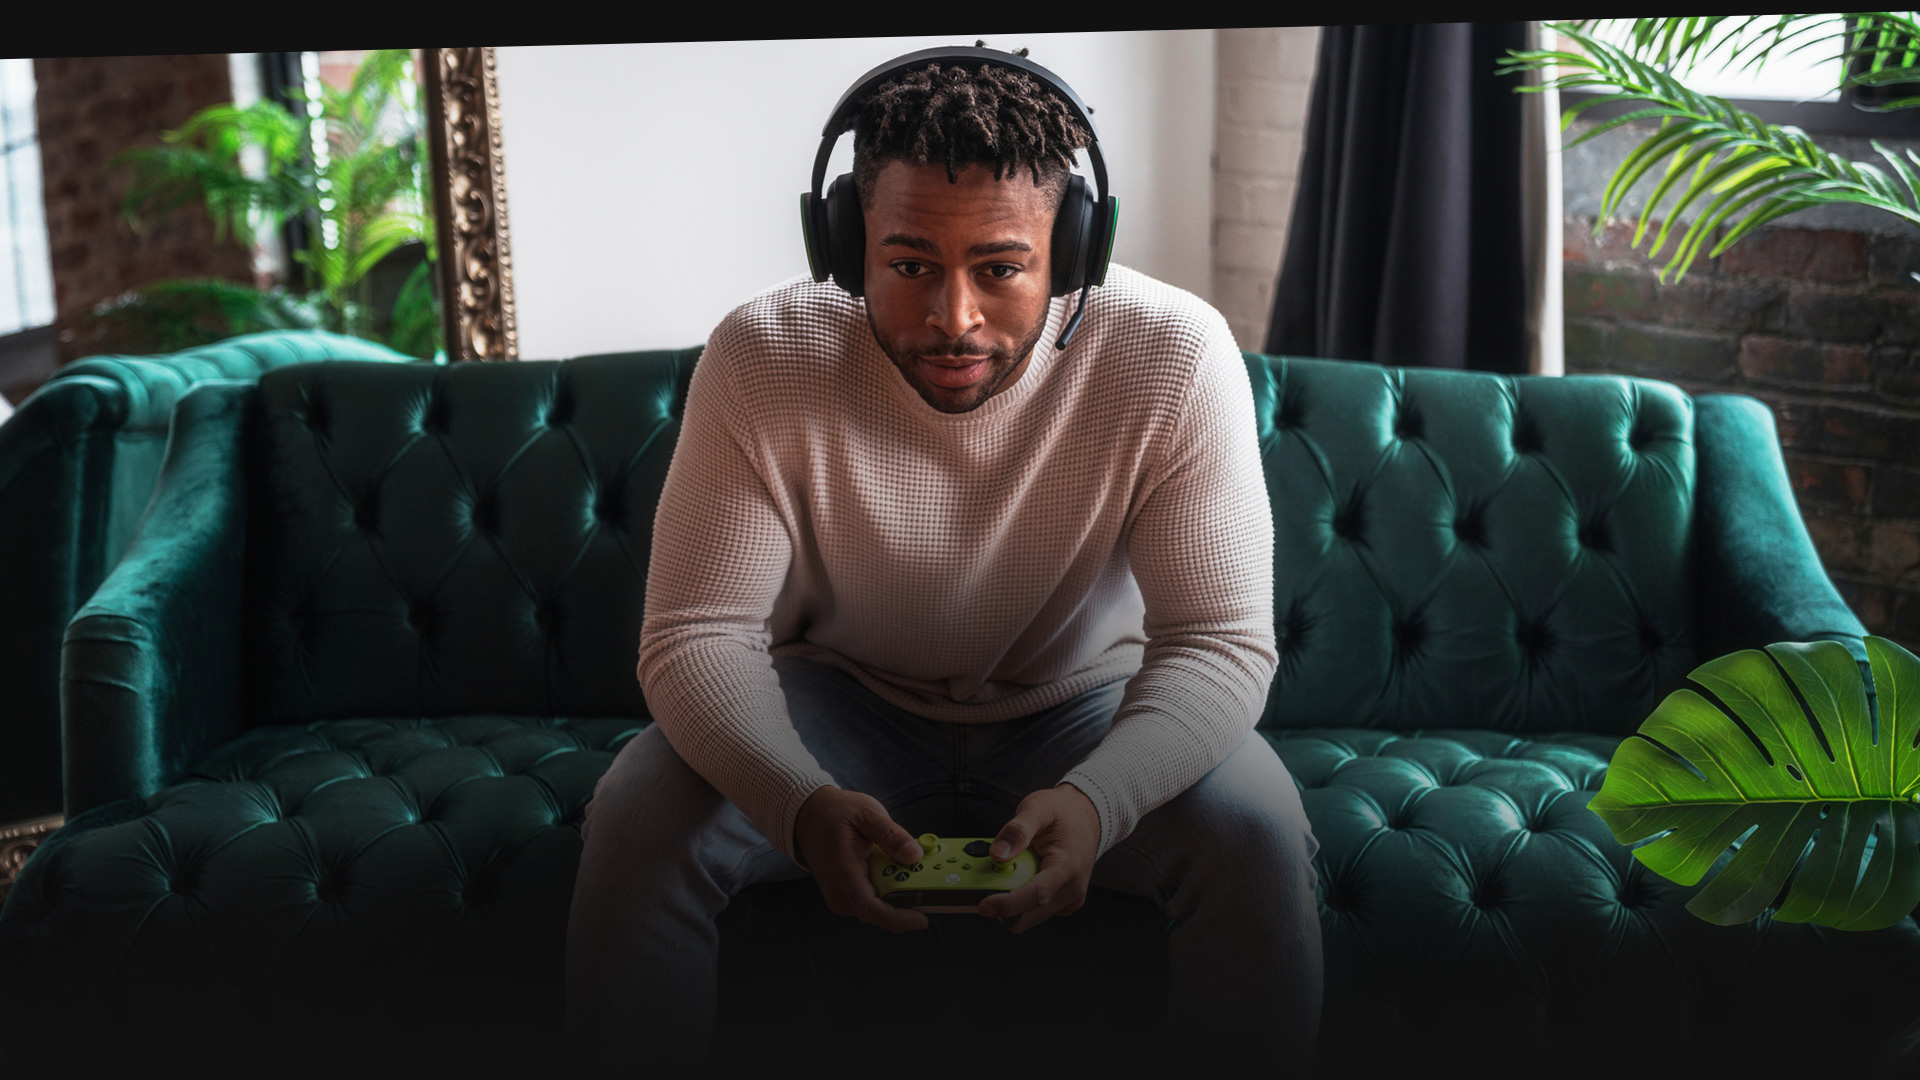 One person wearing a headset playing Xbox on a sofa